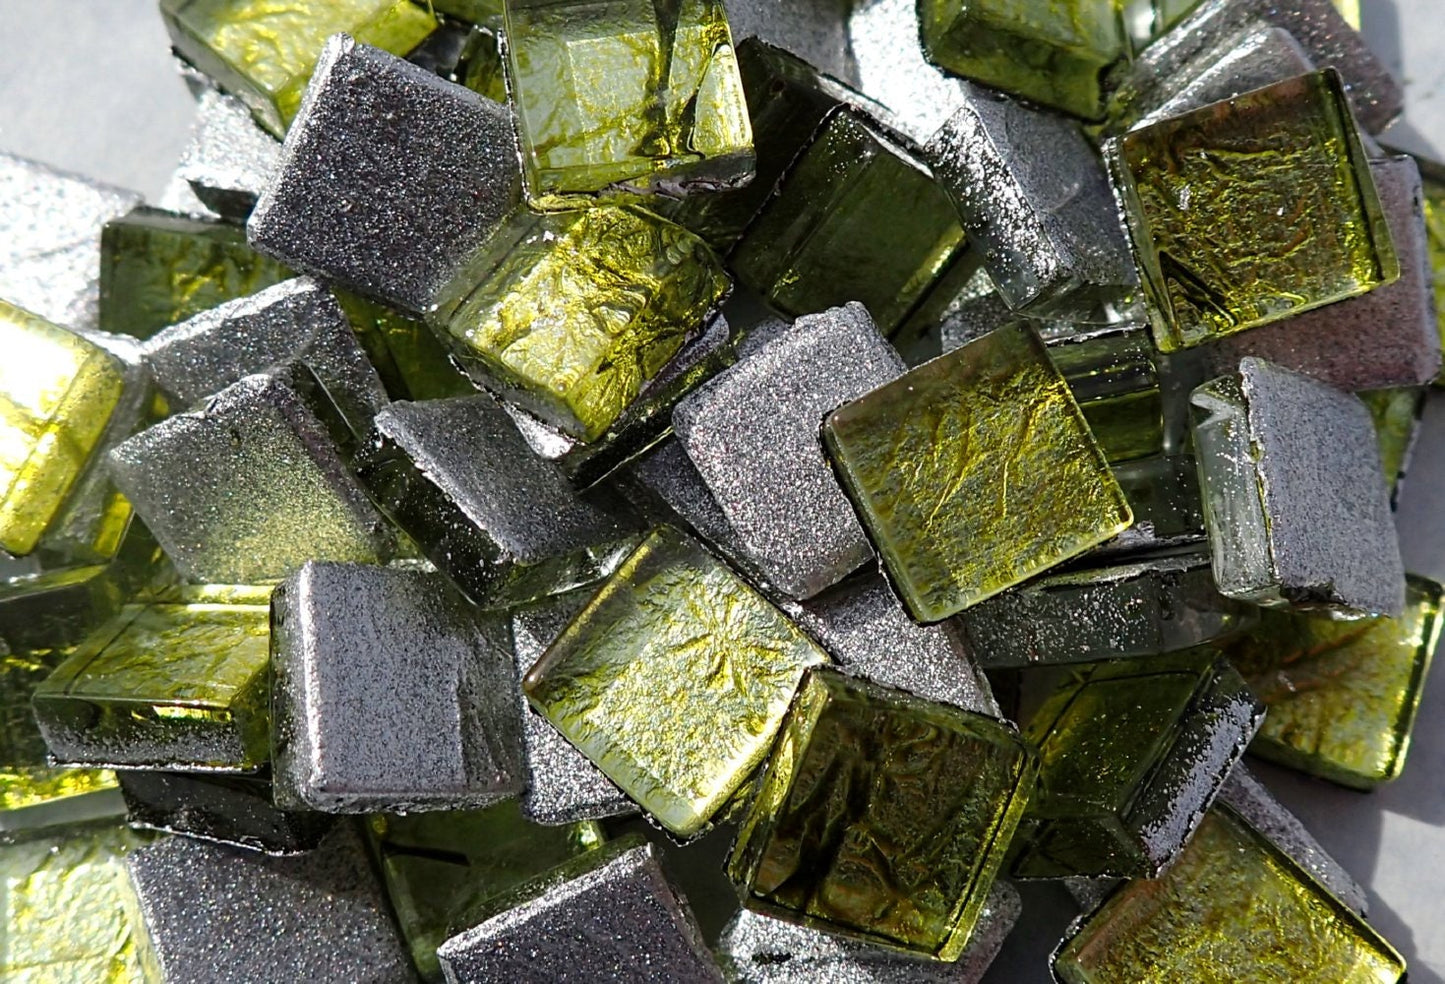 Green Foil Square Crystal Tiles - 10mm - 50g Metallic Glass Tiles in Chartreuse - Approx 50 Tiles